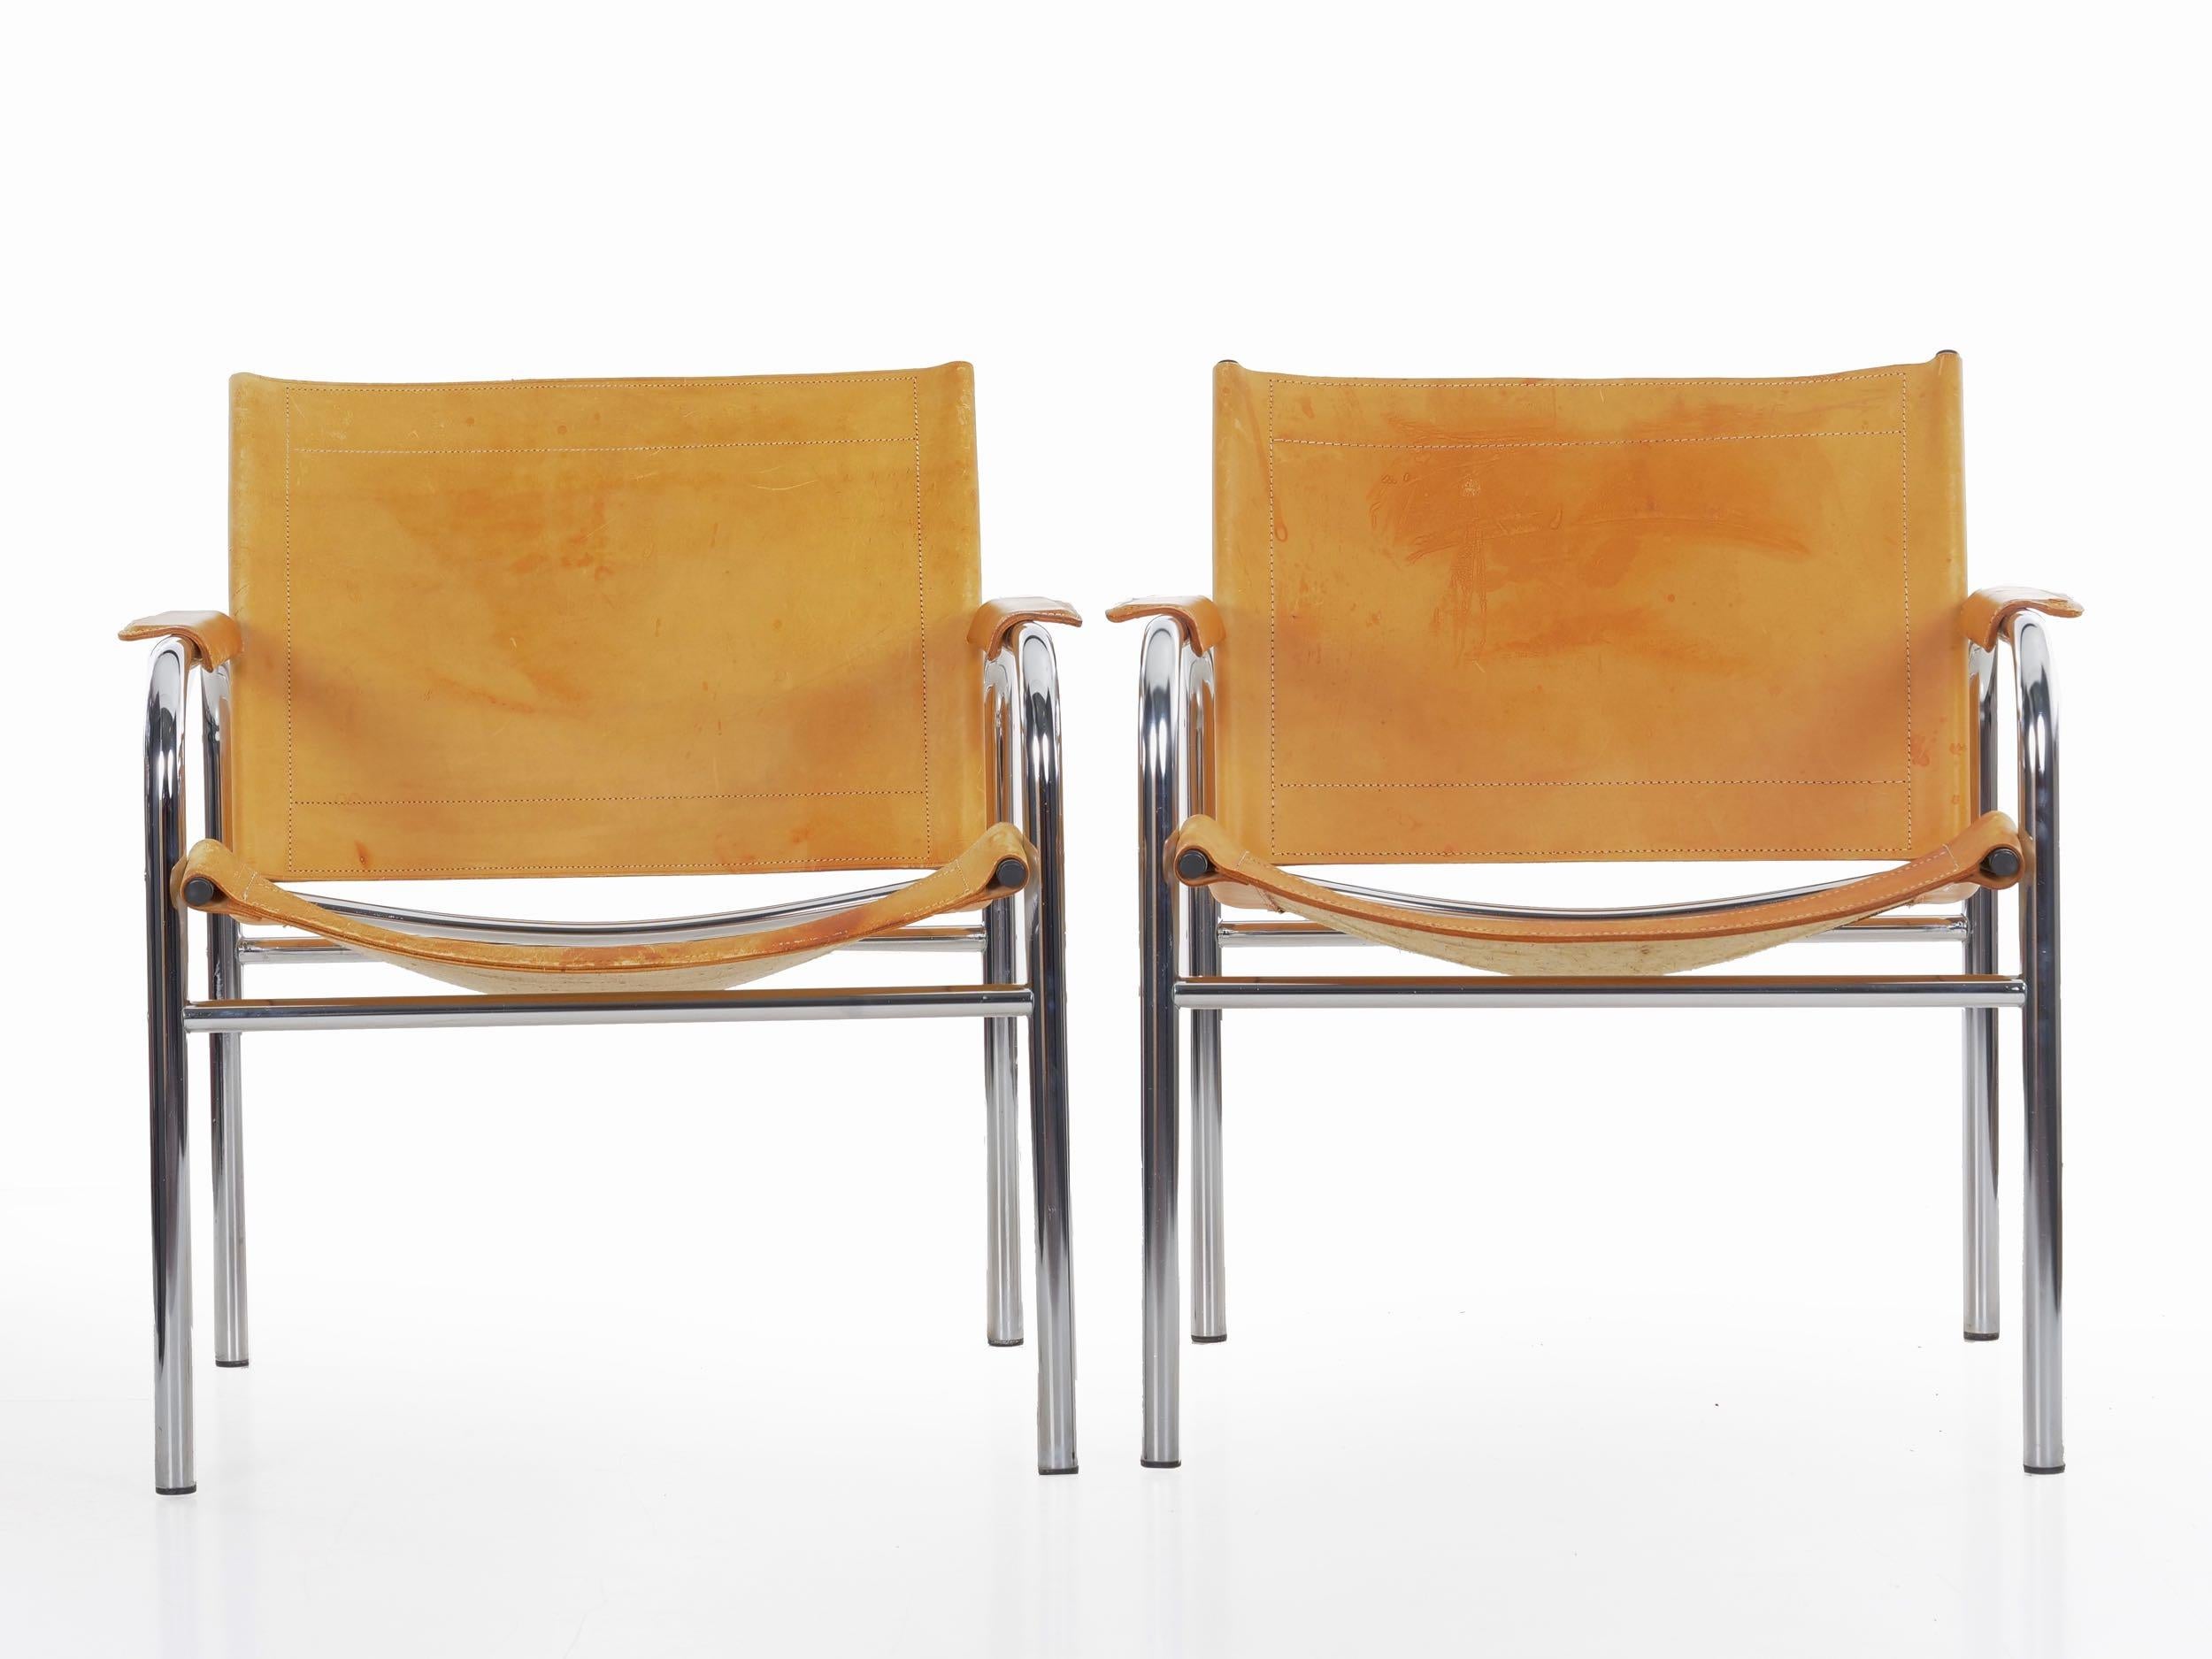 A very cool iconic design by Tord Bjorklund, these simple chromed steel tubular frames are made so interesting with the heavy stitched vegetable dyed cognac brown leather that has worn wonderfully over the years.

Measurements: 29 5/8